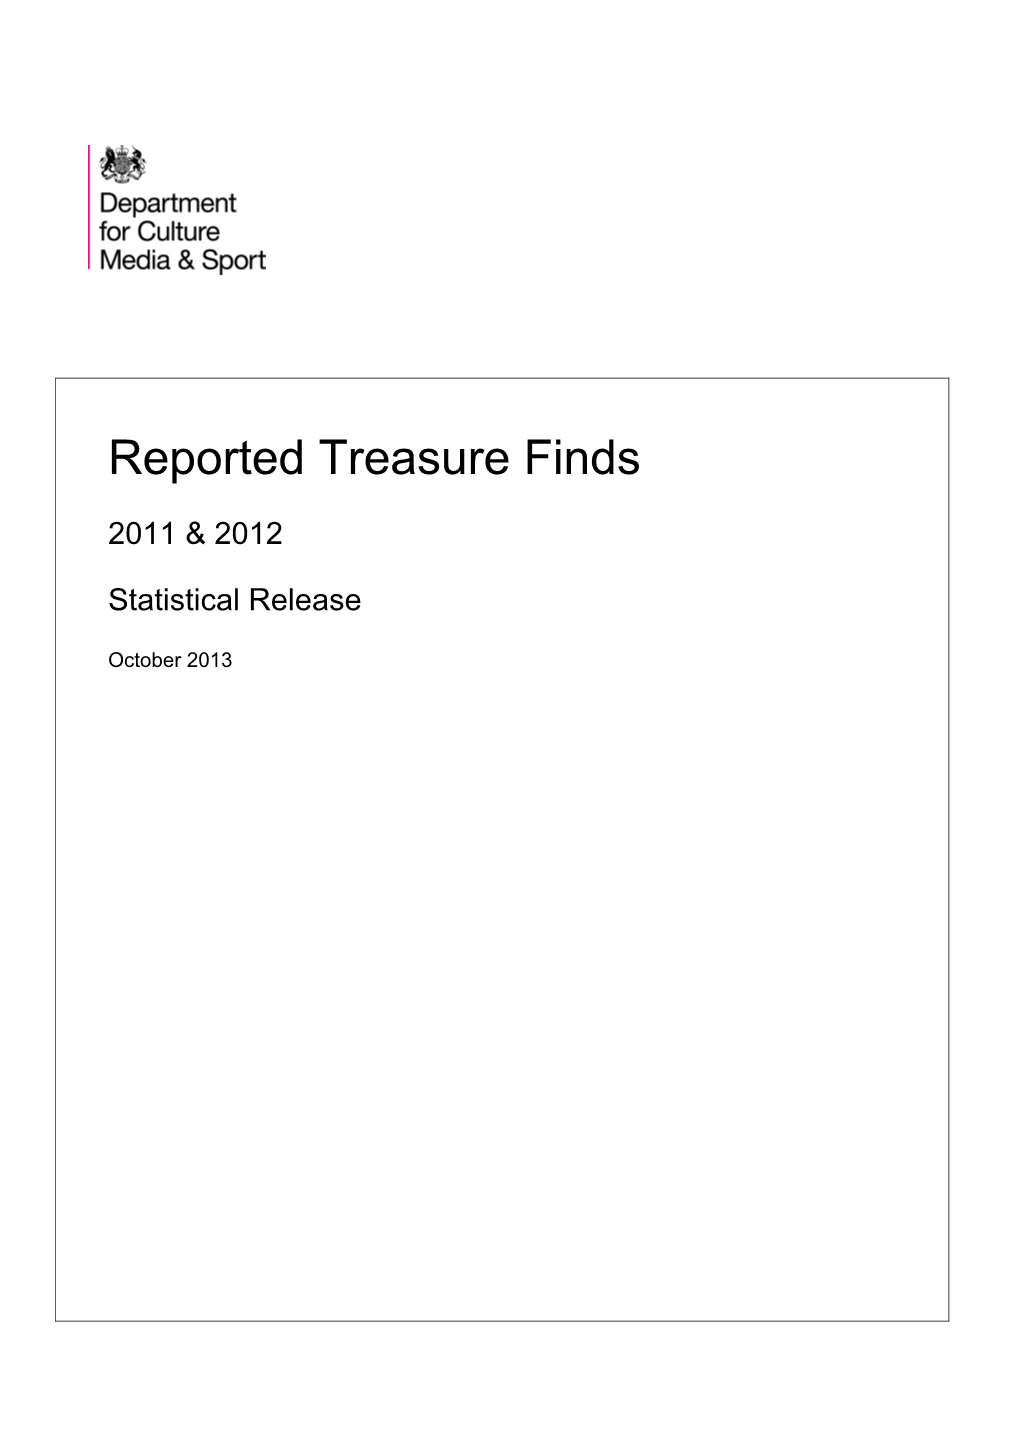 Reported Treasure Finds Is an Official Statistic and Has Been Produced to the Standards